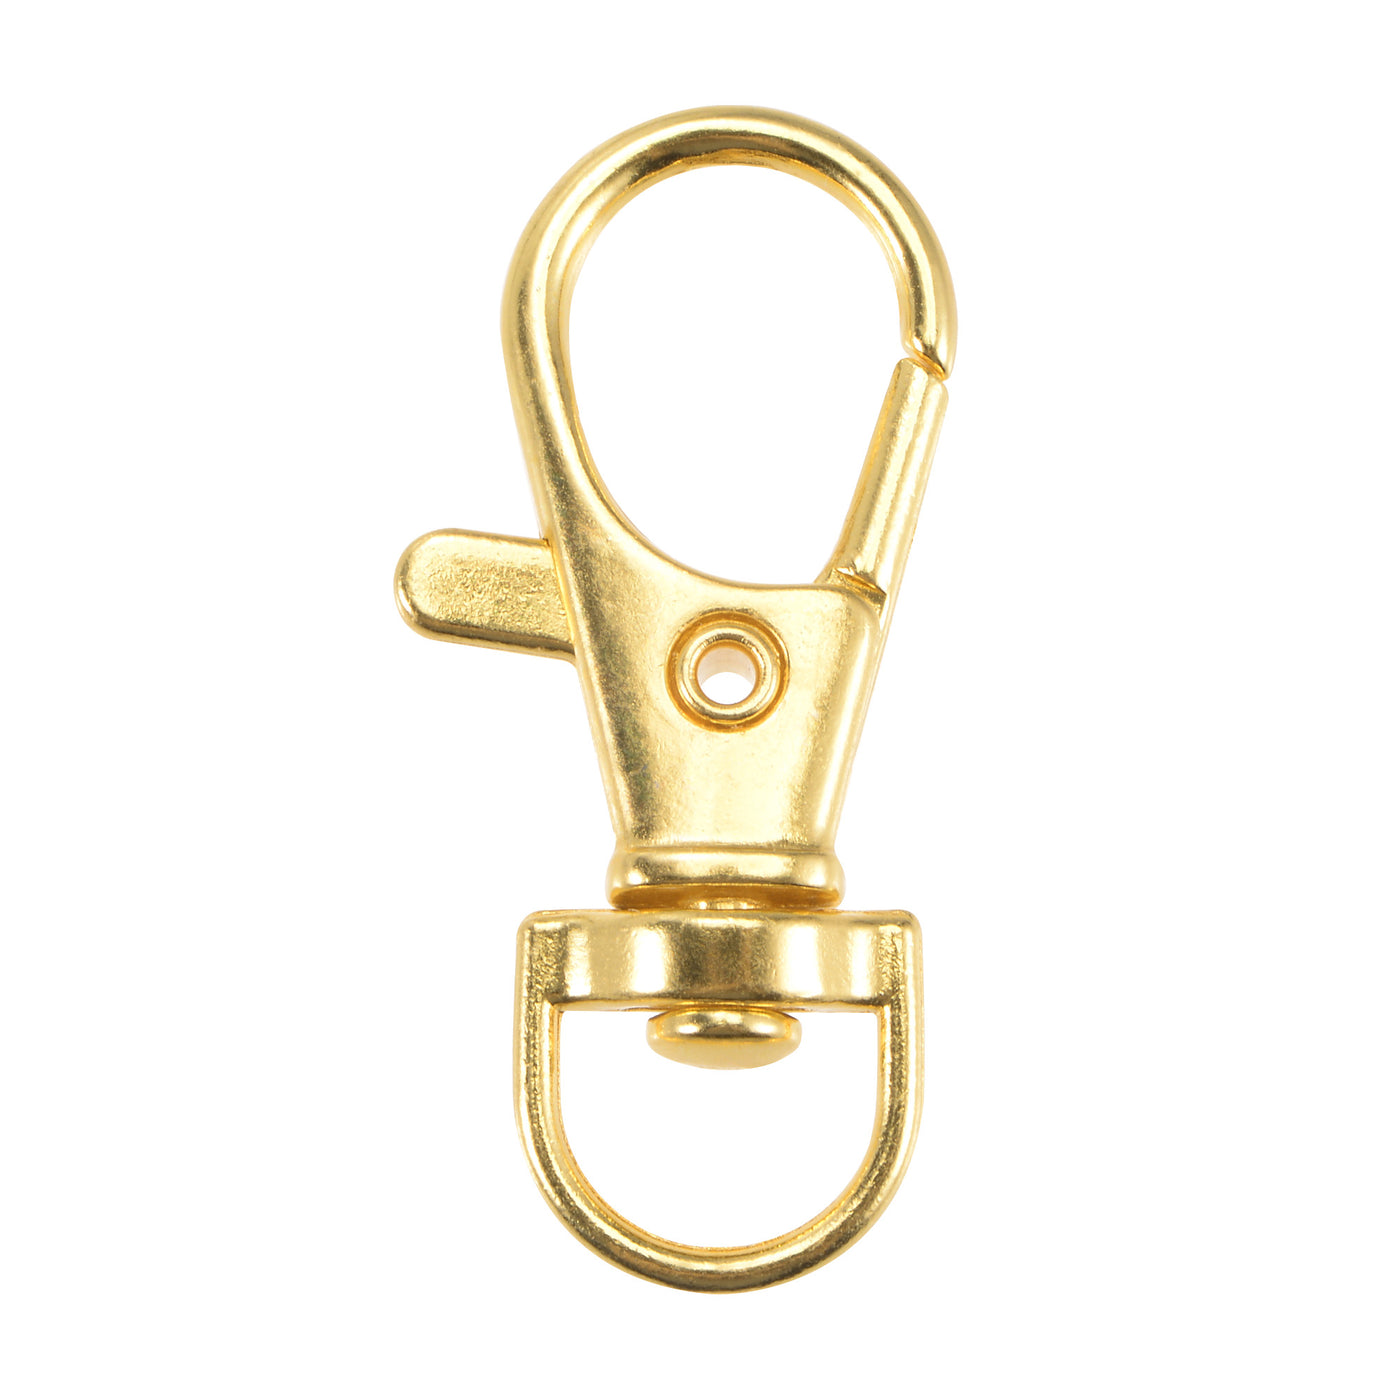 Uxcell Uxcell Swivel Clasps Lanyard Snap Hook 35mm Length, Zinc Alloy, Golden, for DIY Crafts Keychains, 30pcs